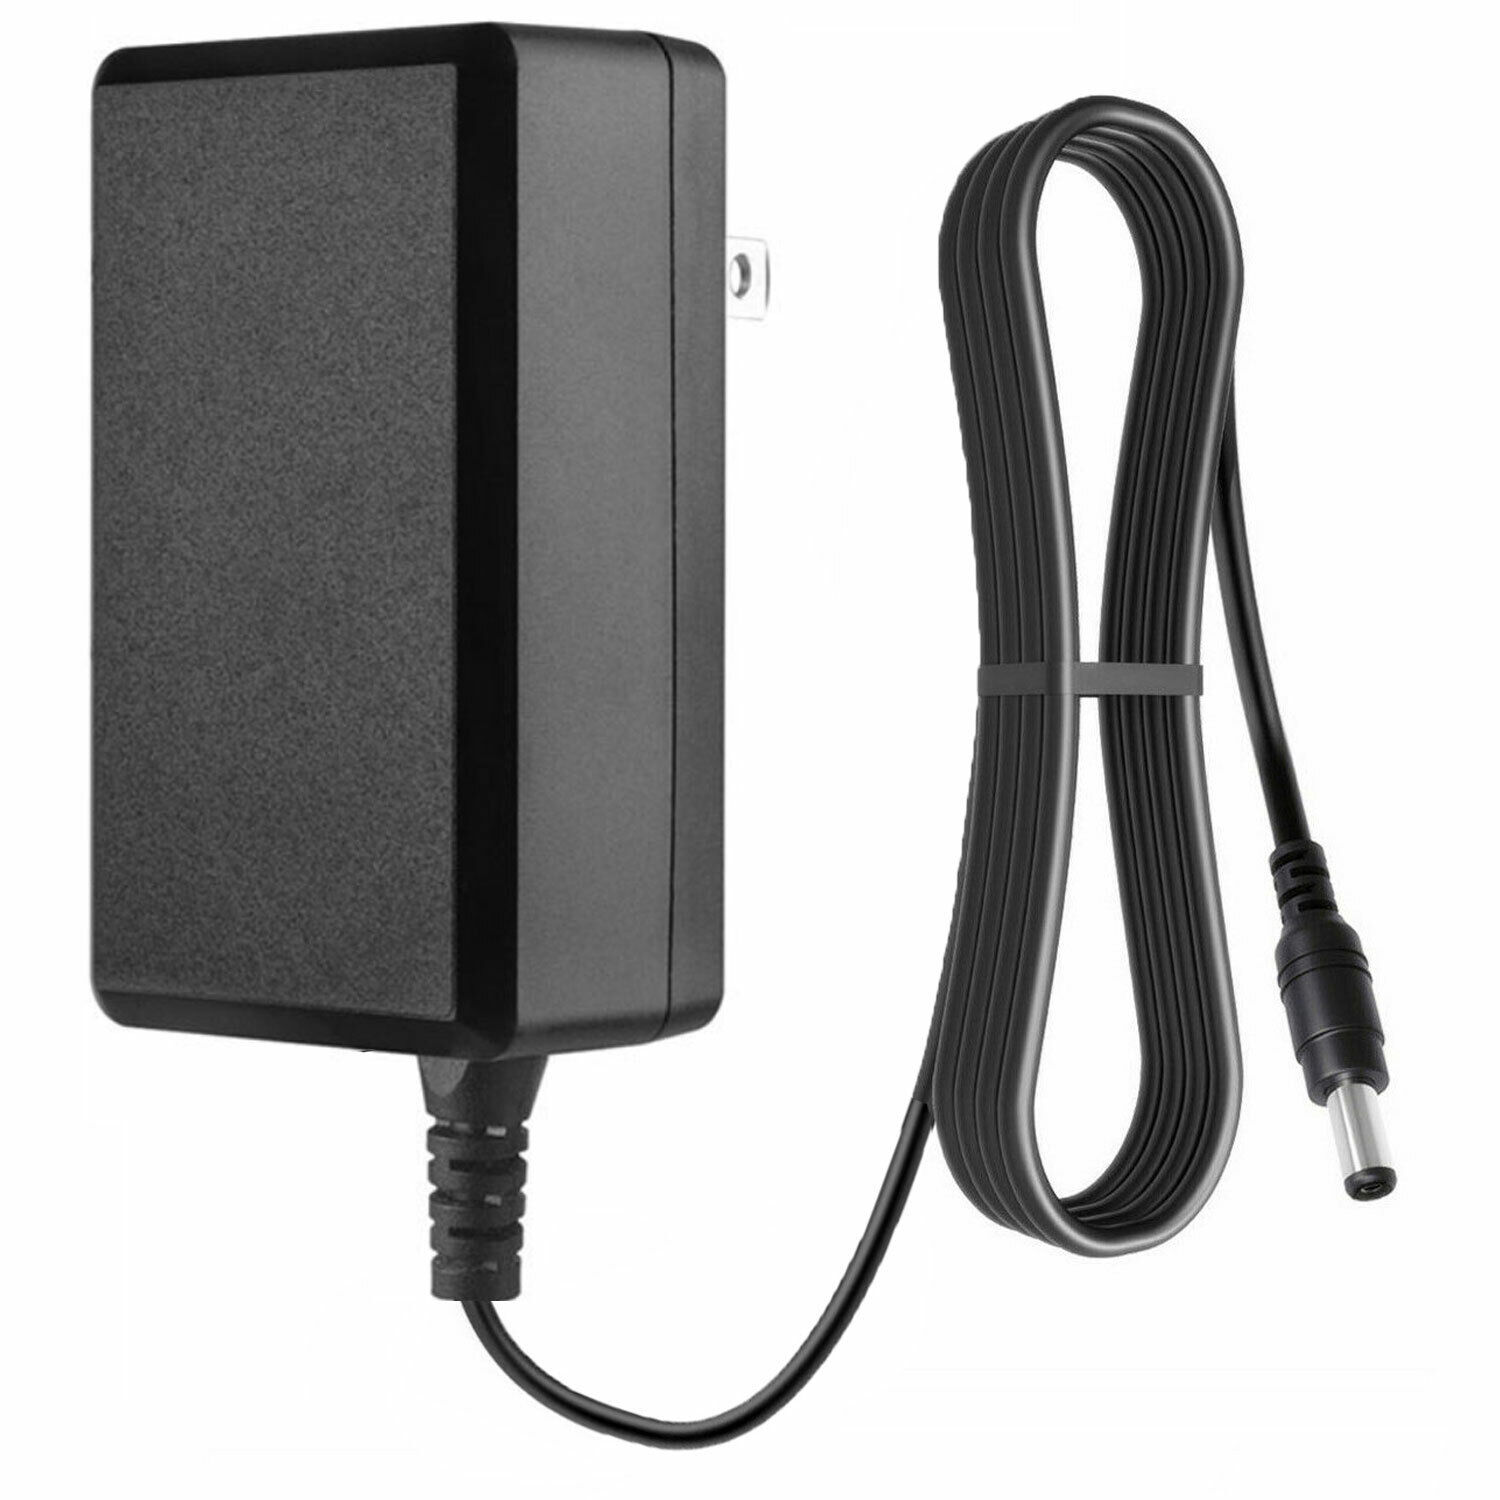 AC Adapter For Ohaus Scout Pro Digital Balance Portable Scale Power Supply Cord Compatible Model # or Part #: Replacem